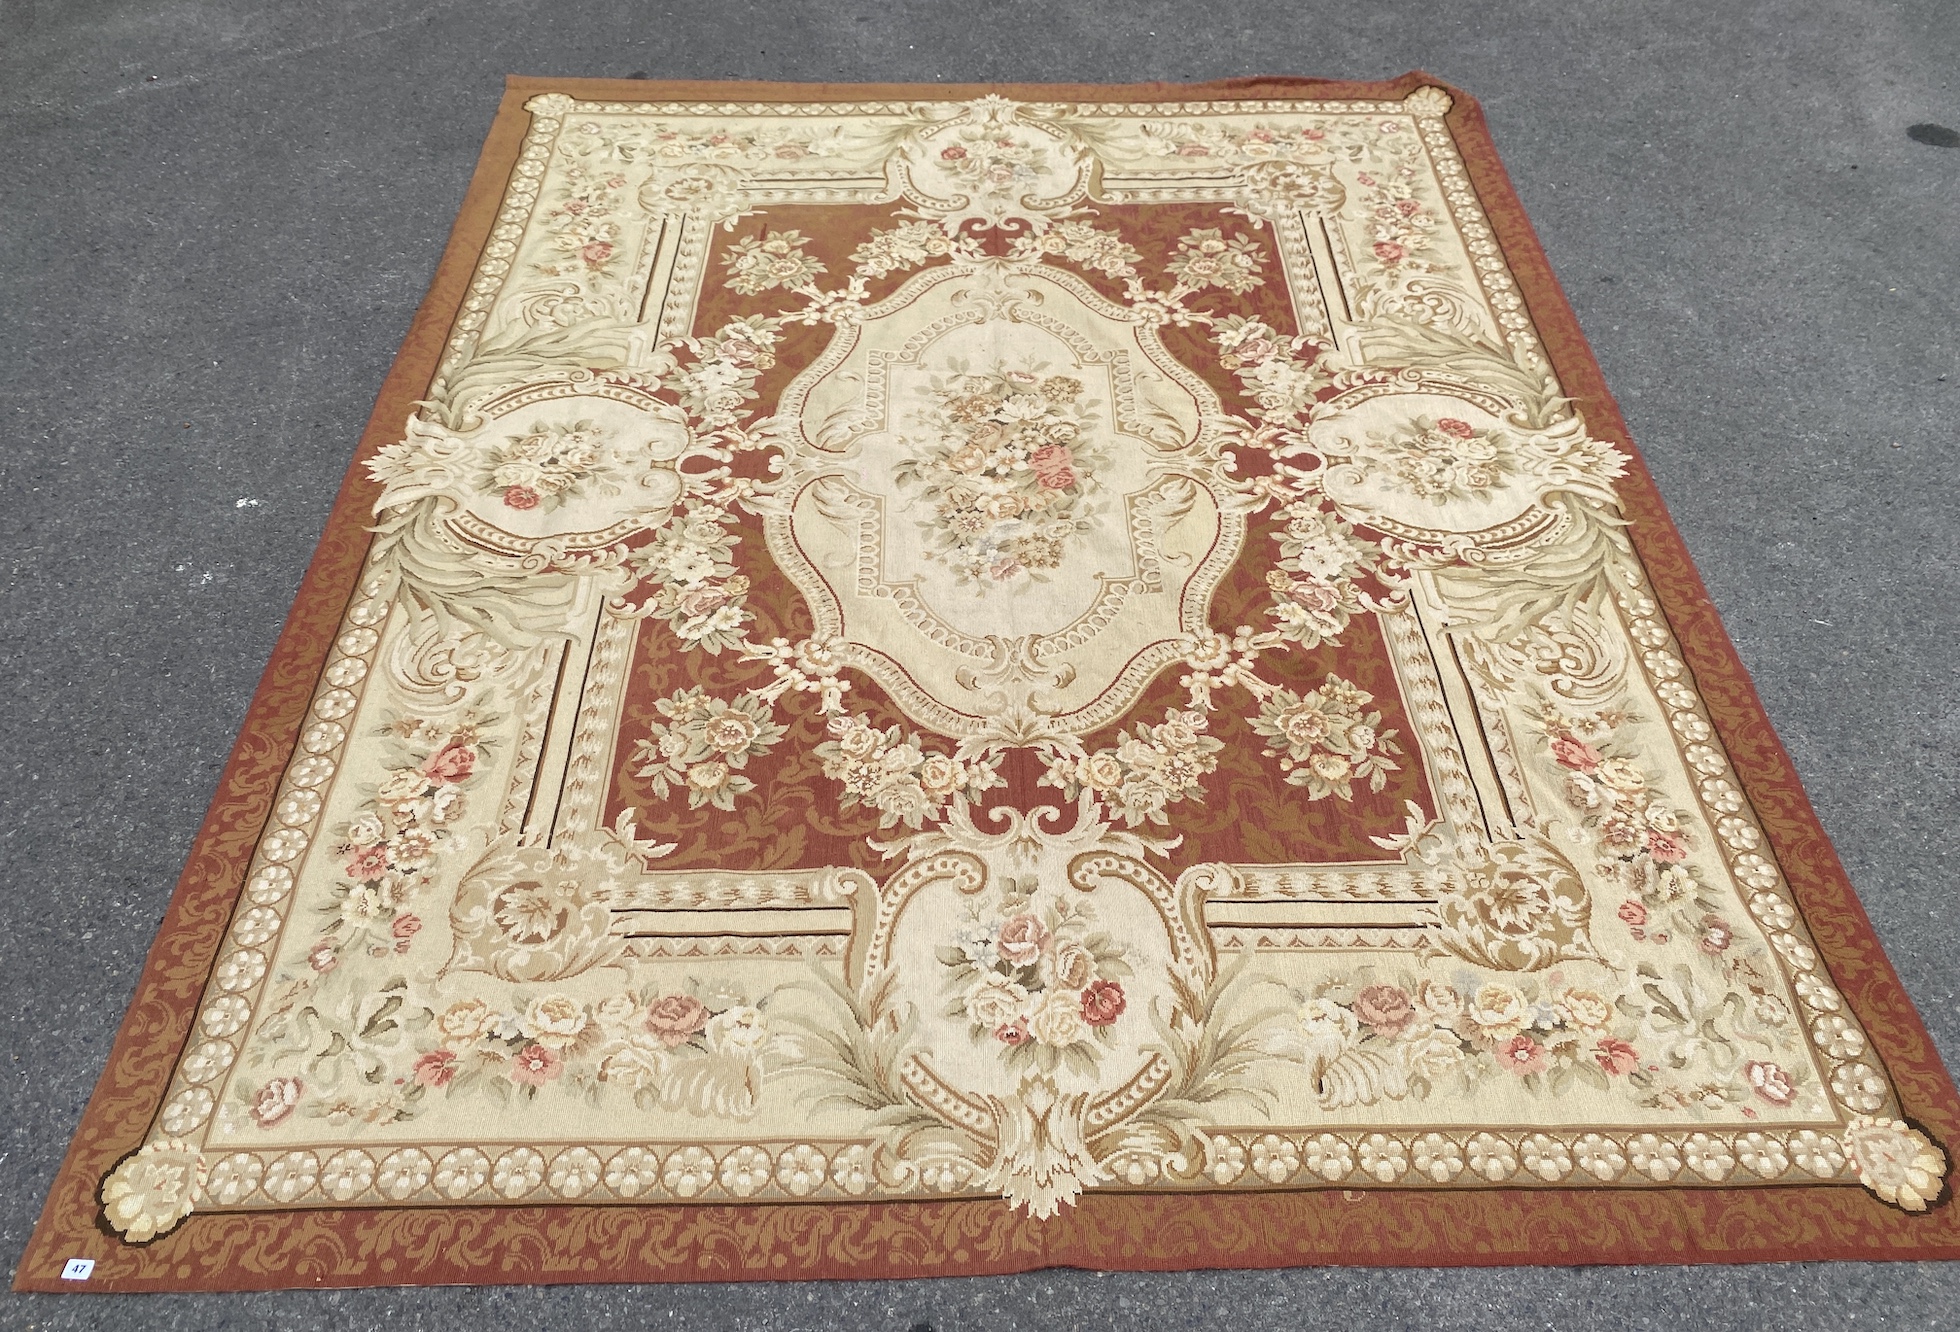 An Aubusson style tapestry carpet, approximately 300 x 240cm